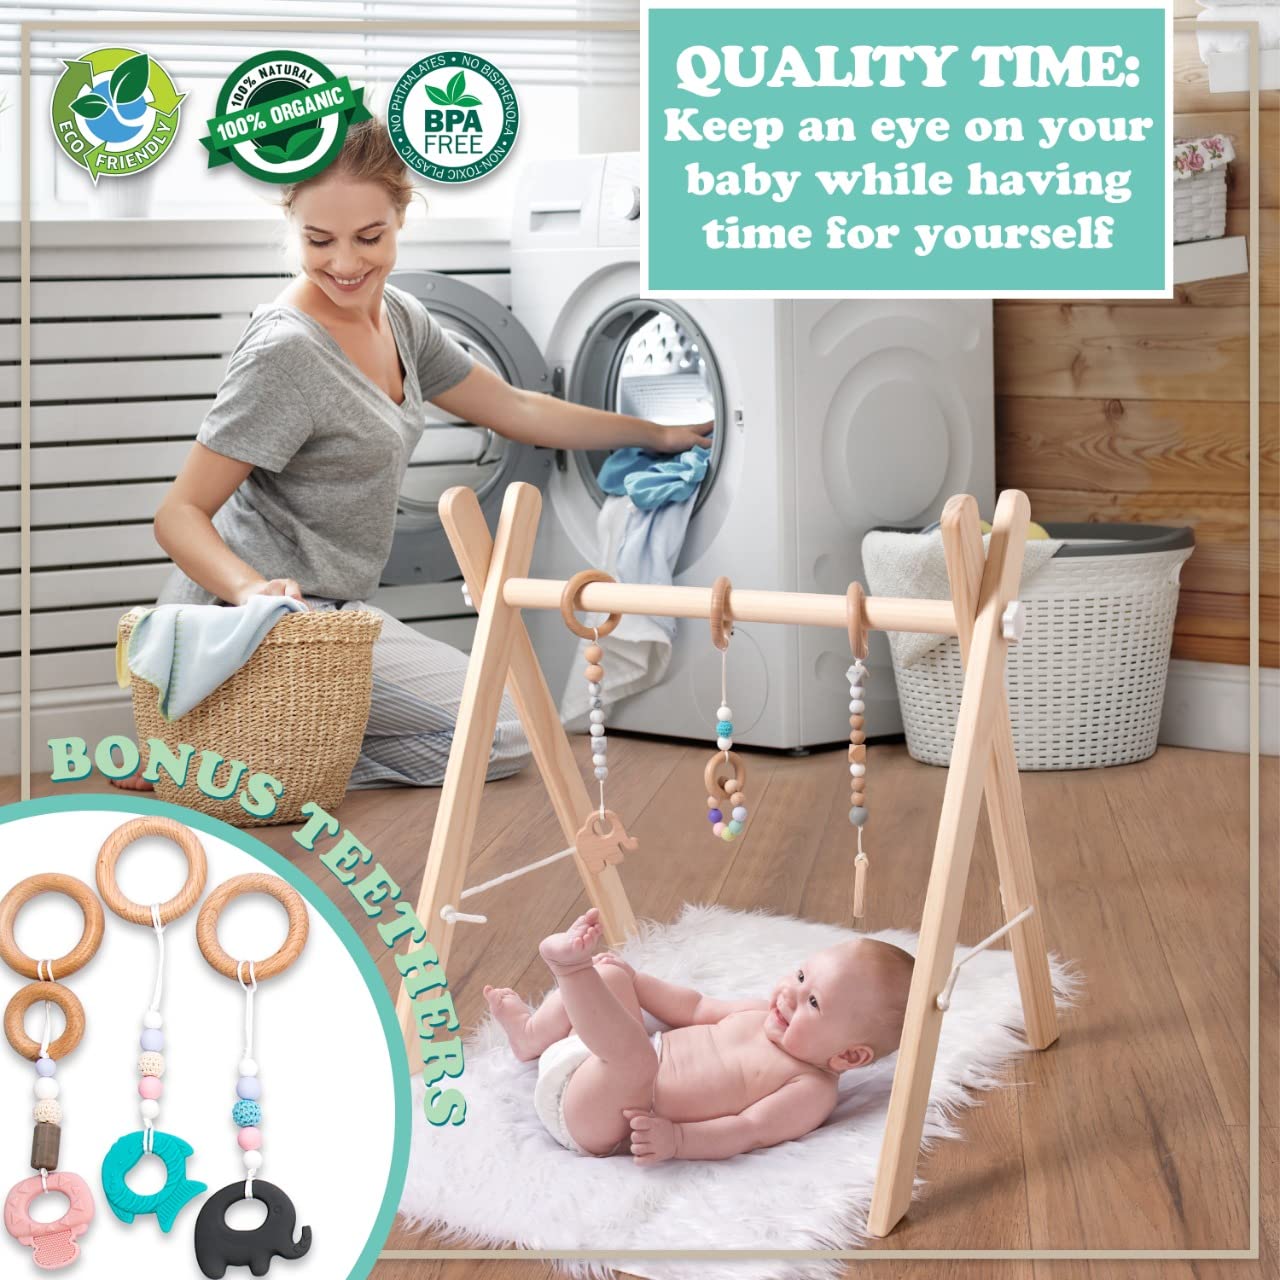 LAVIELLE Wooden Baby Gym Set with 6 Hanging Teethers, Montessori Foldable Play Gym for Newborns, Ideal Nursery Activity Center, Perfect Giftable Toy Set